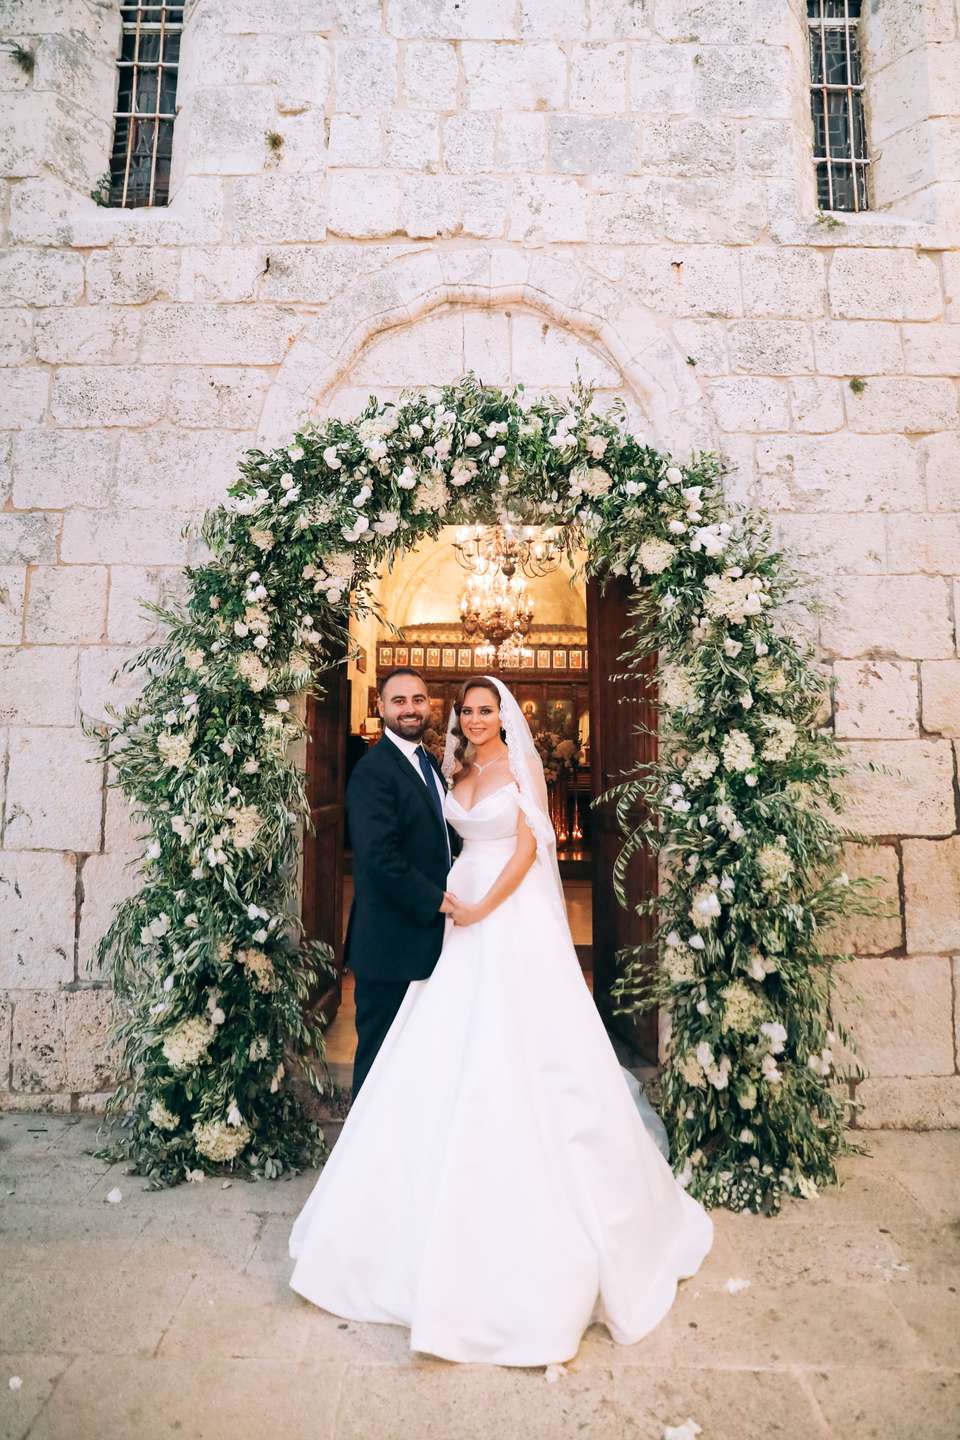 An Olive Tree Inspired Wedding in Lebanon